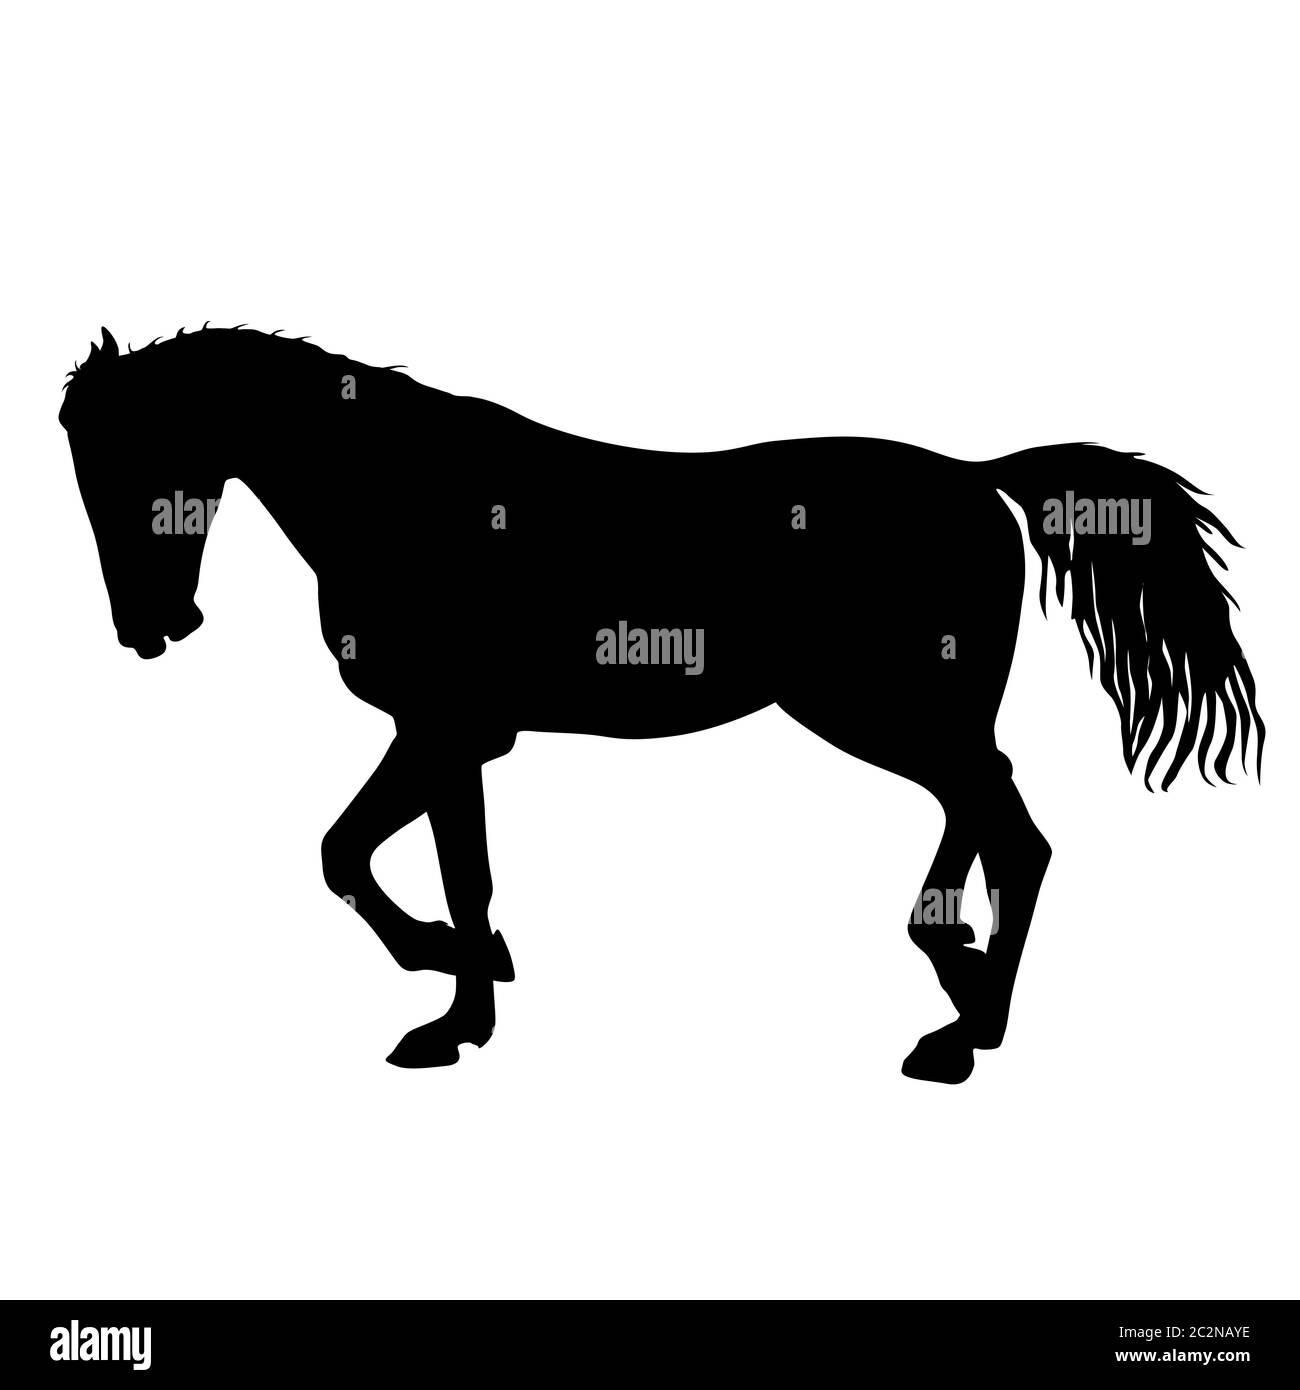 silhouette of black mustang horse vector illustration Stock Photo